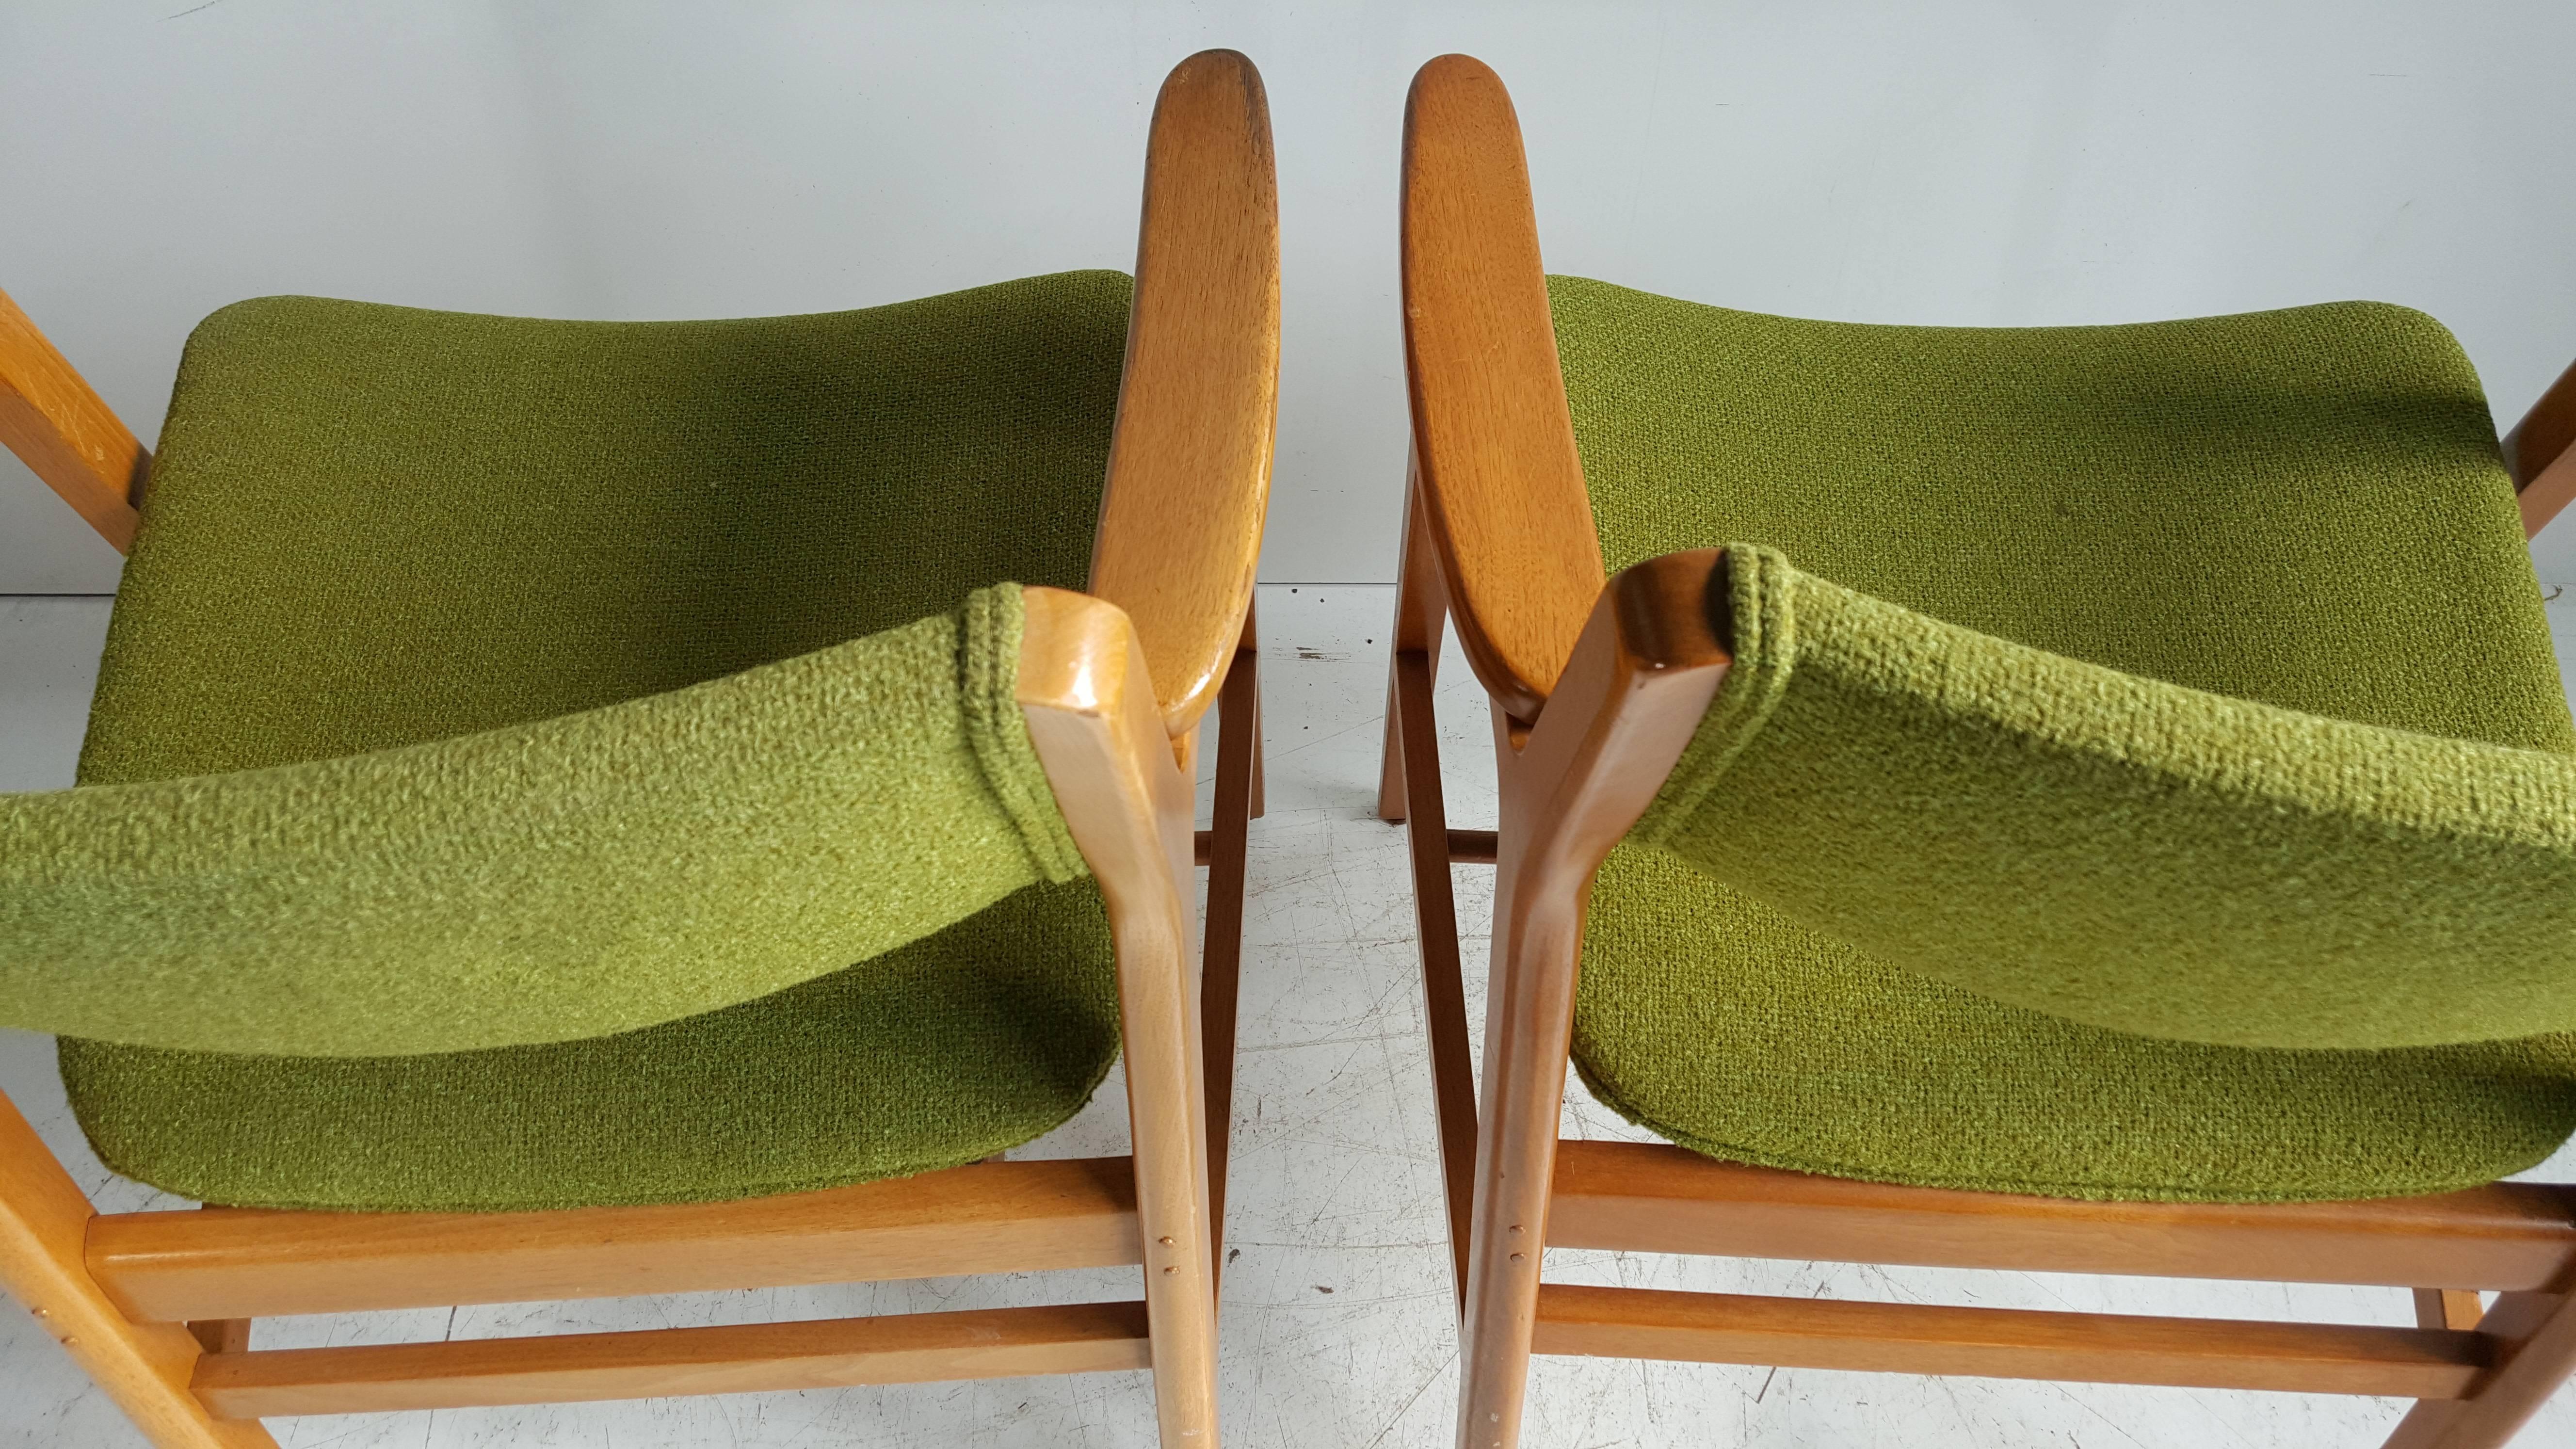 Upholstery Classic Mid-Century Modern Armchairs, Manufactured by W.H. Gunlocke Chair Co.